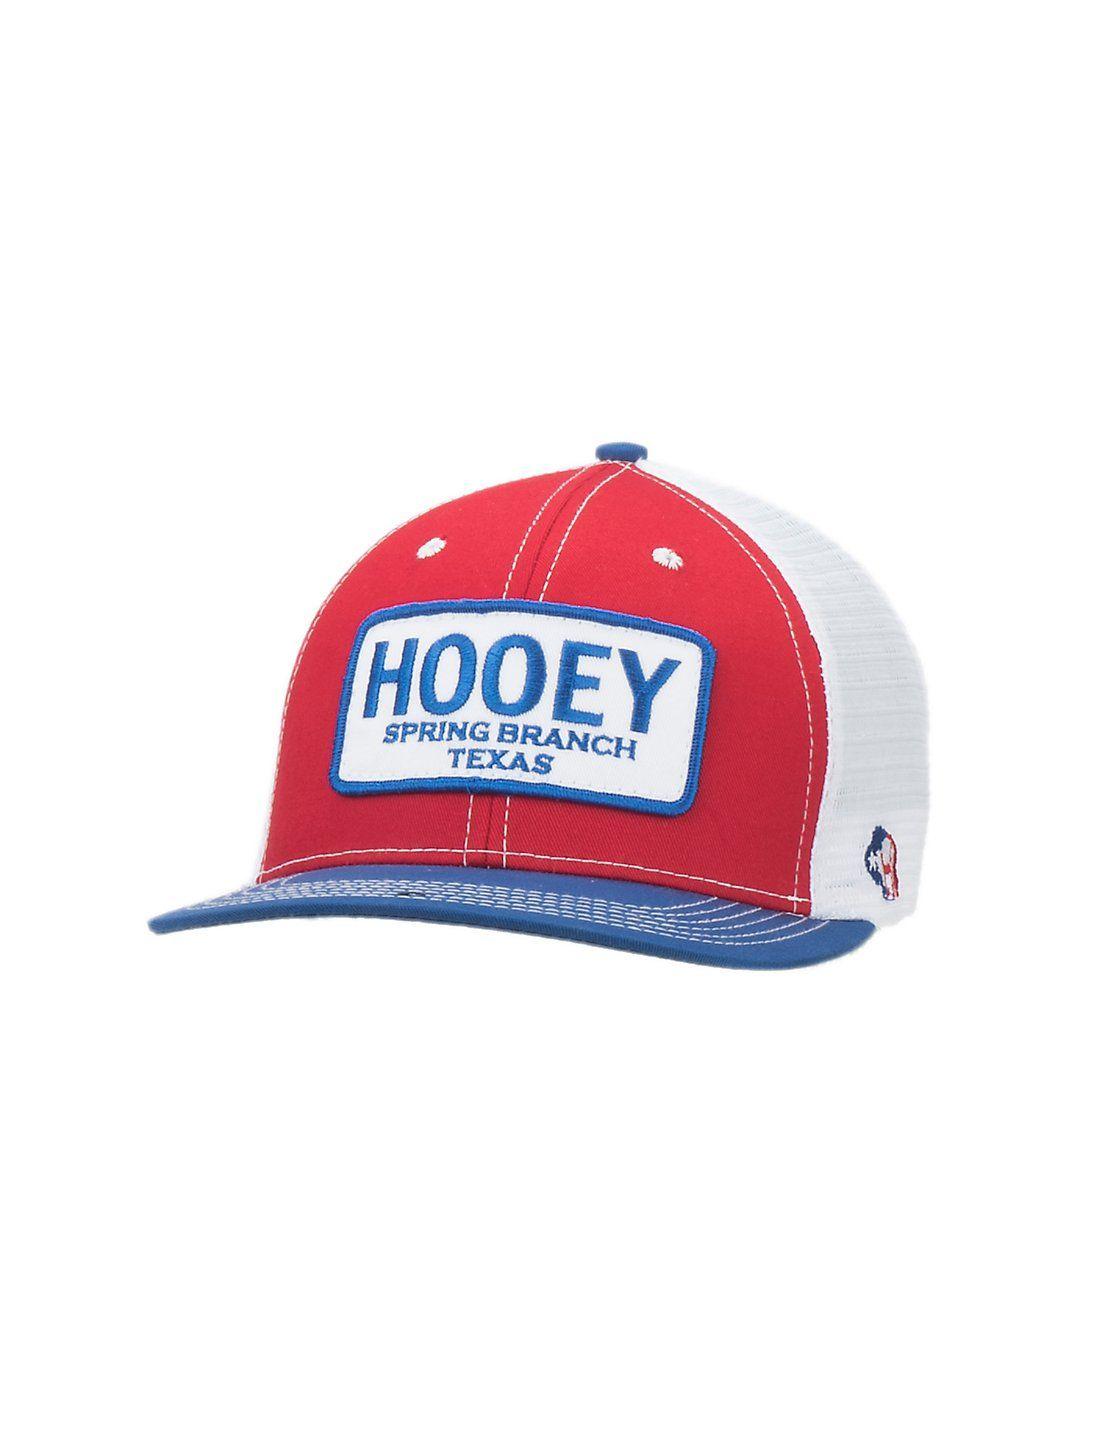 Red Cowboy Logo - HOOey Red, White and Blue with Patch Logo Mesh Back Cap. Cavender's